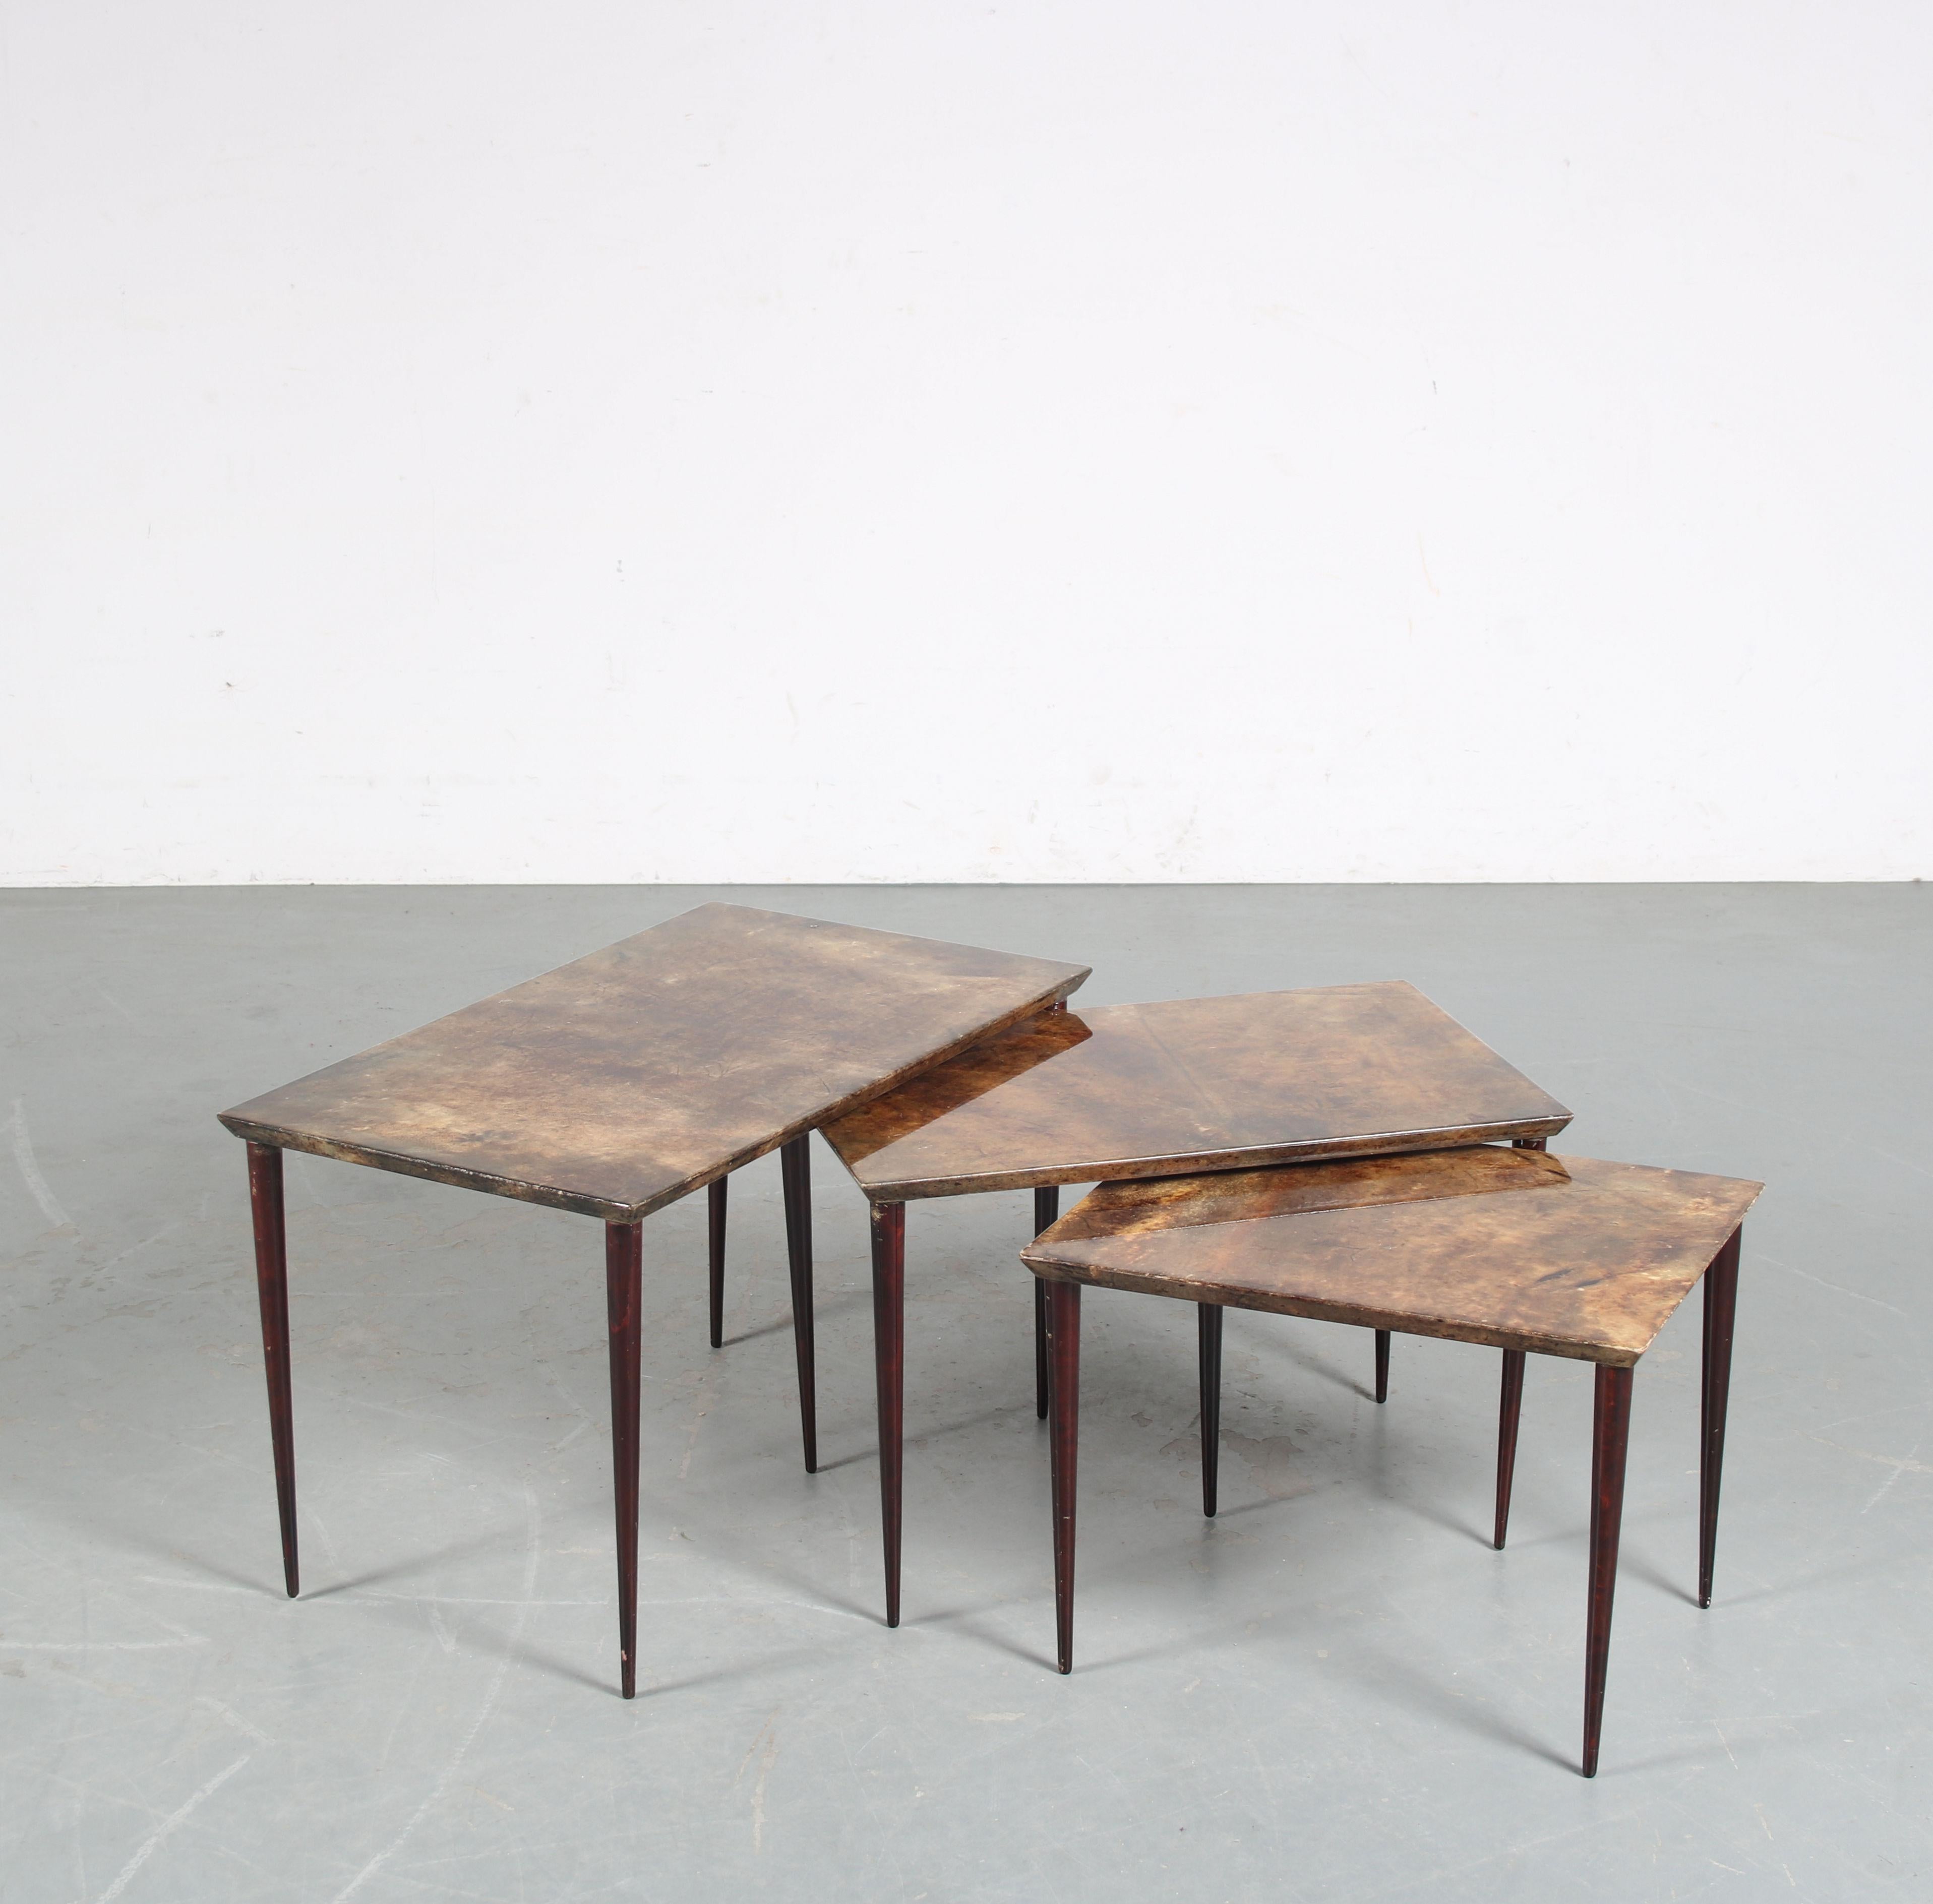 Mid-20th Century Aldo Tura Nesting Tables from Italy, 1950 For Sale